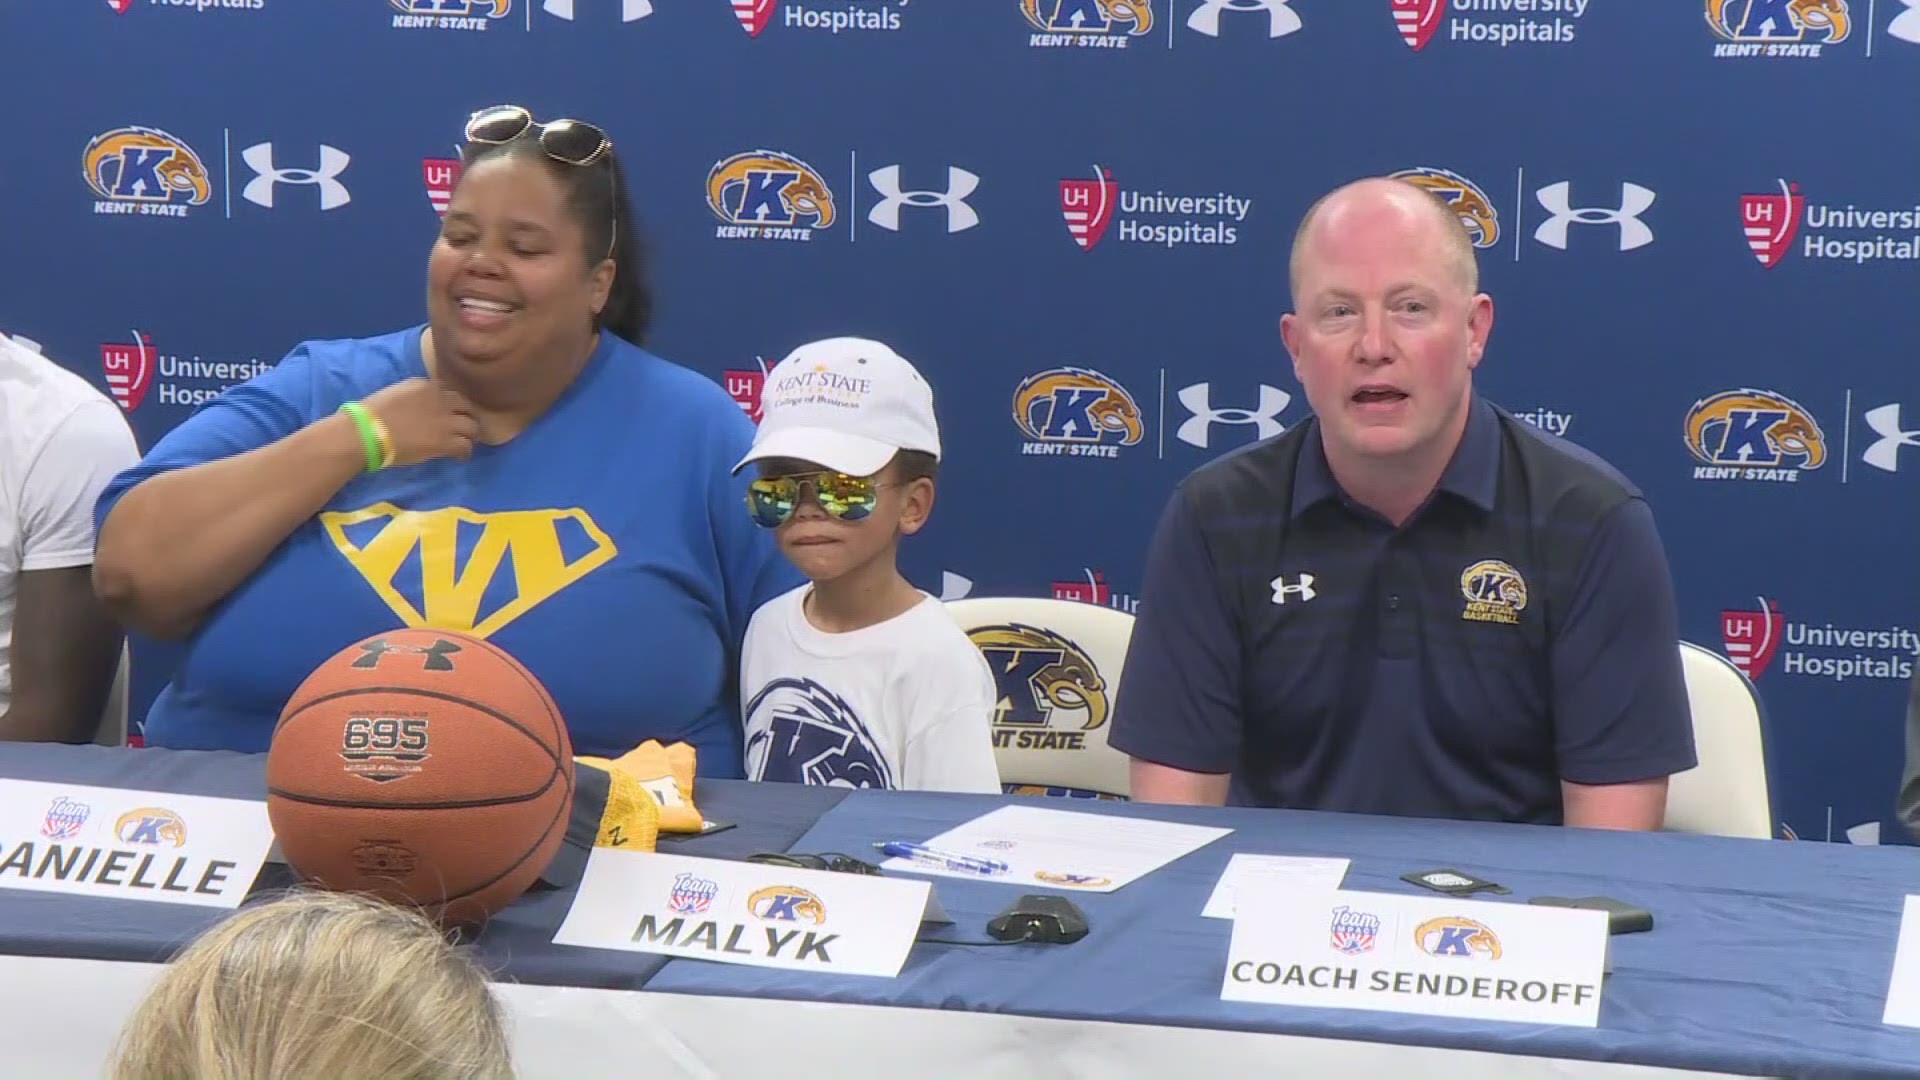 5-year-old Malyk Foster of Kent officially joined the Golden Flashes in a ceremony at the MAC Center on Monday, presented by Team IMPACT, a national nonprofit that connects children facing serious or chronic illnesses with college athletic teams, forming lifelong bonds and life-changing outcomes.